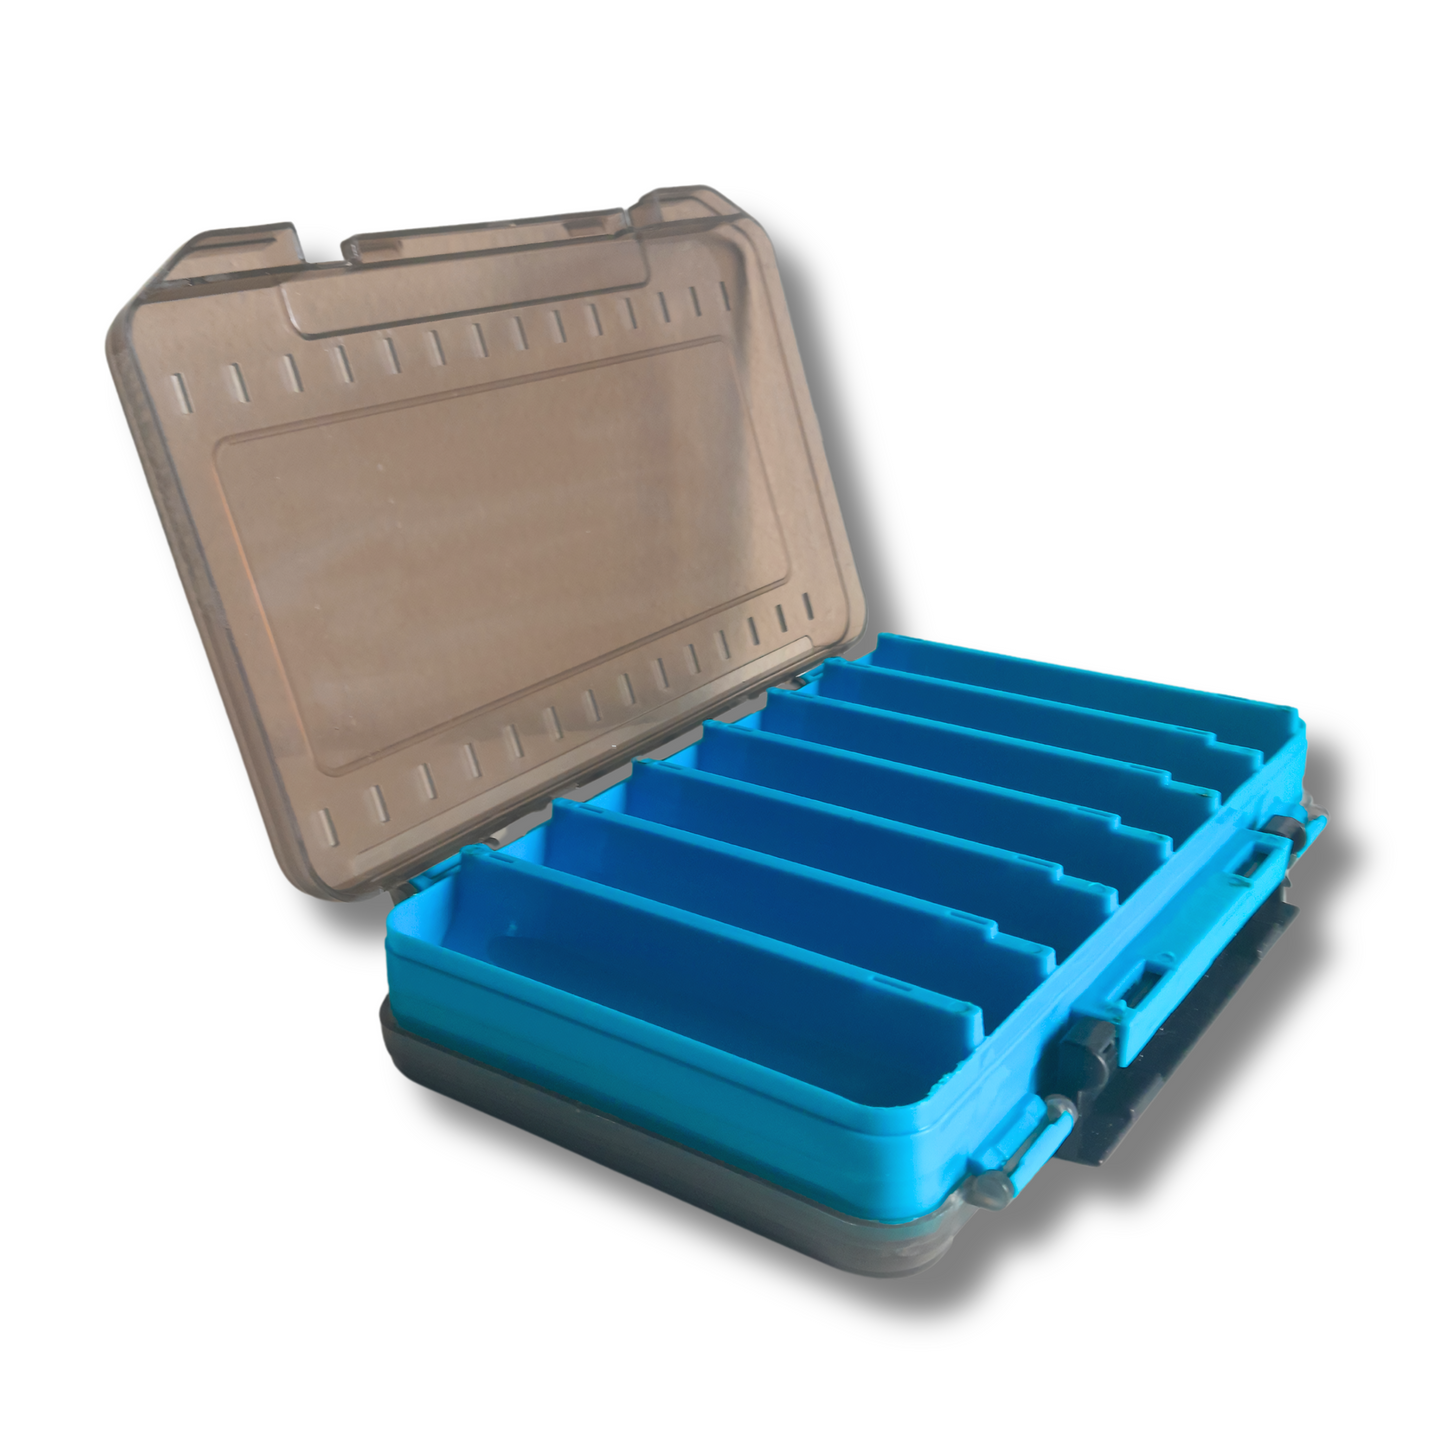 Gobait Fishing Box - 198mm x 132mm | 7.8in x 5.2in - 14 Compartments - Blue